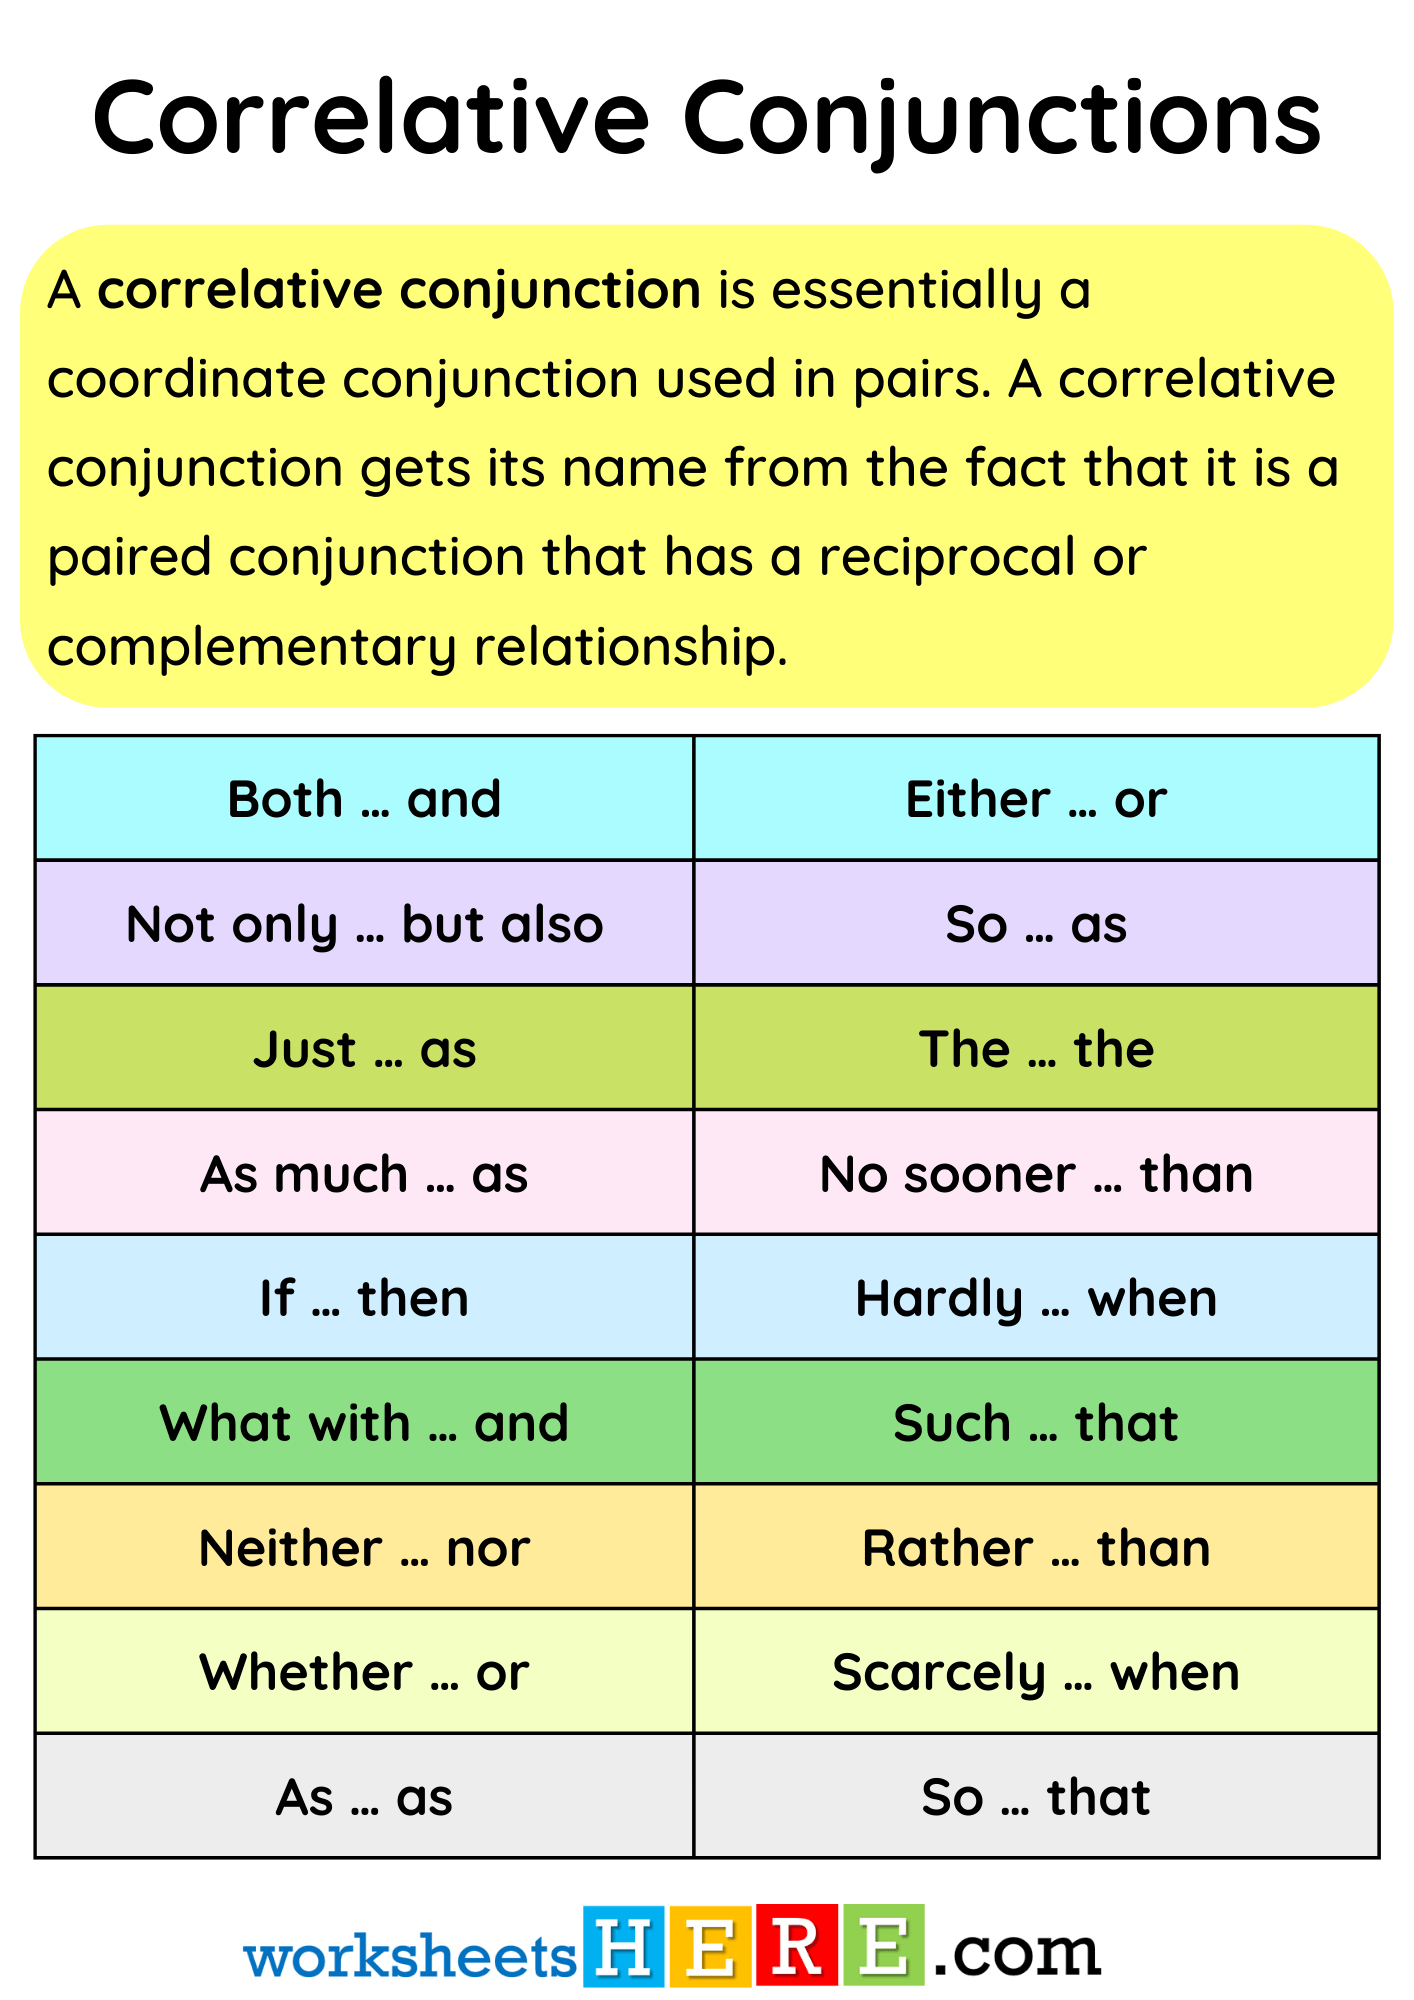 Correlative Conjunctions Definition and Example Sentences PDF Worksheet For Students